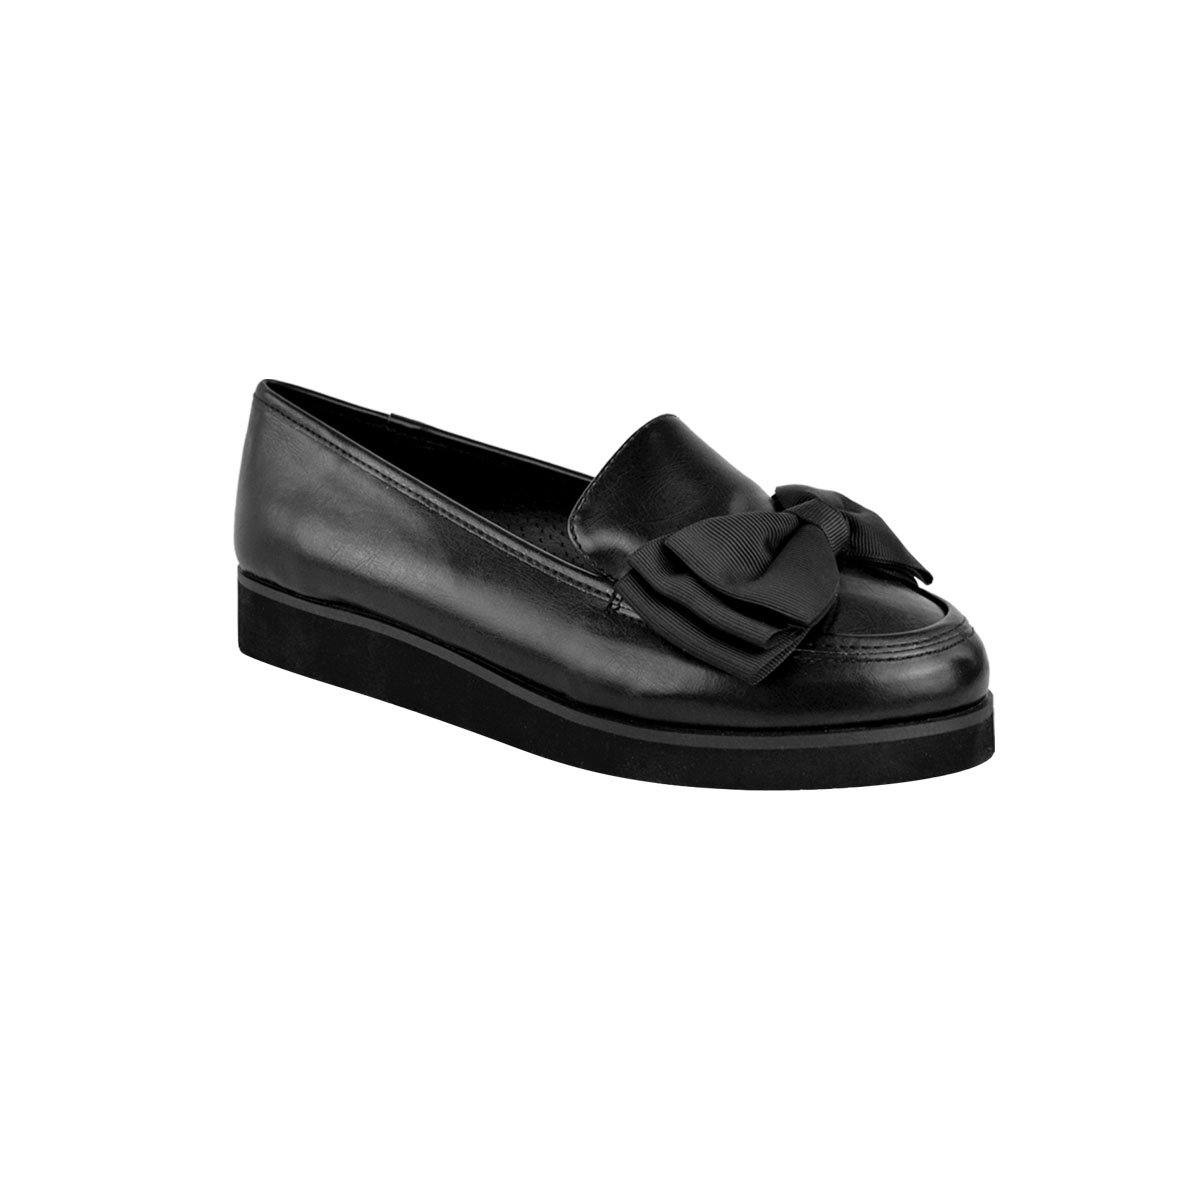 New Ladies Loafer Creeper Chunky Sole 